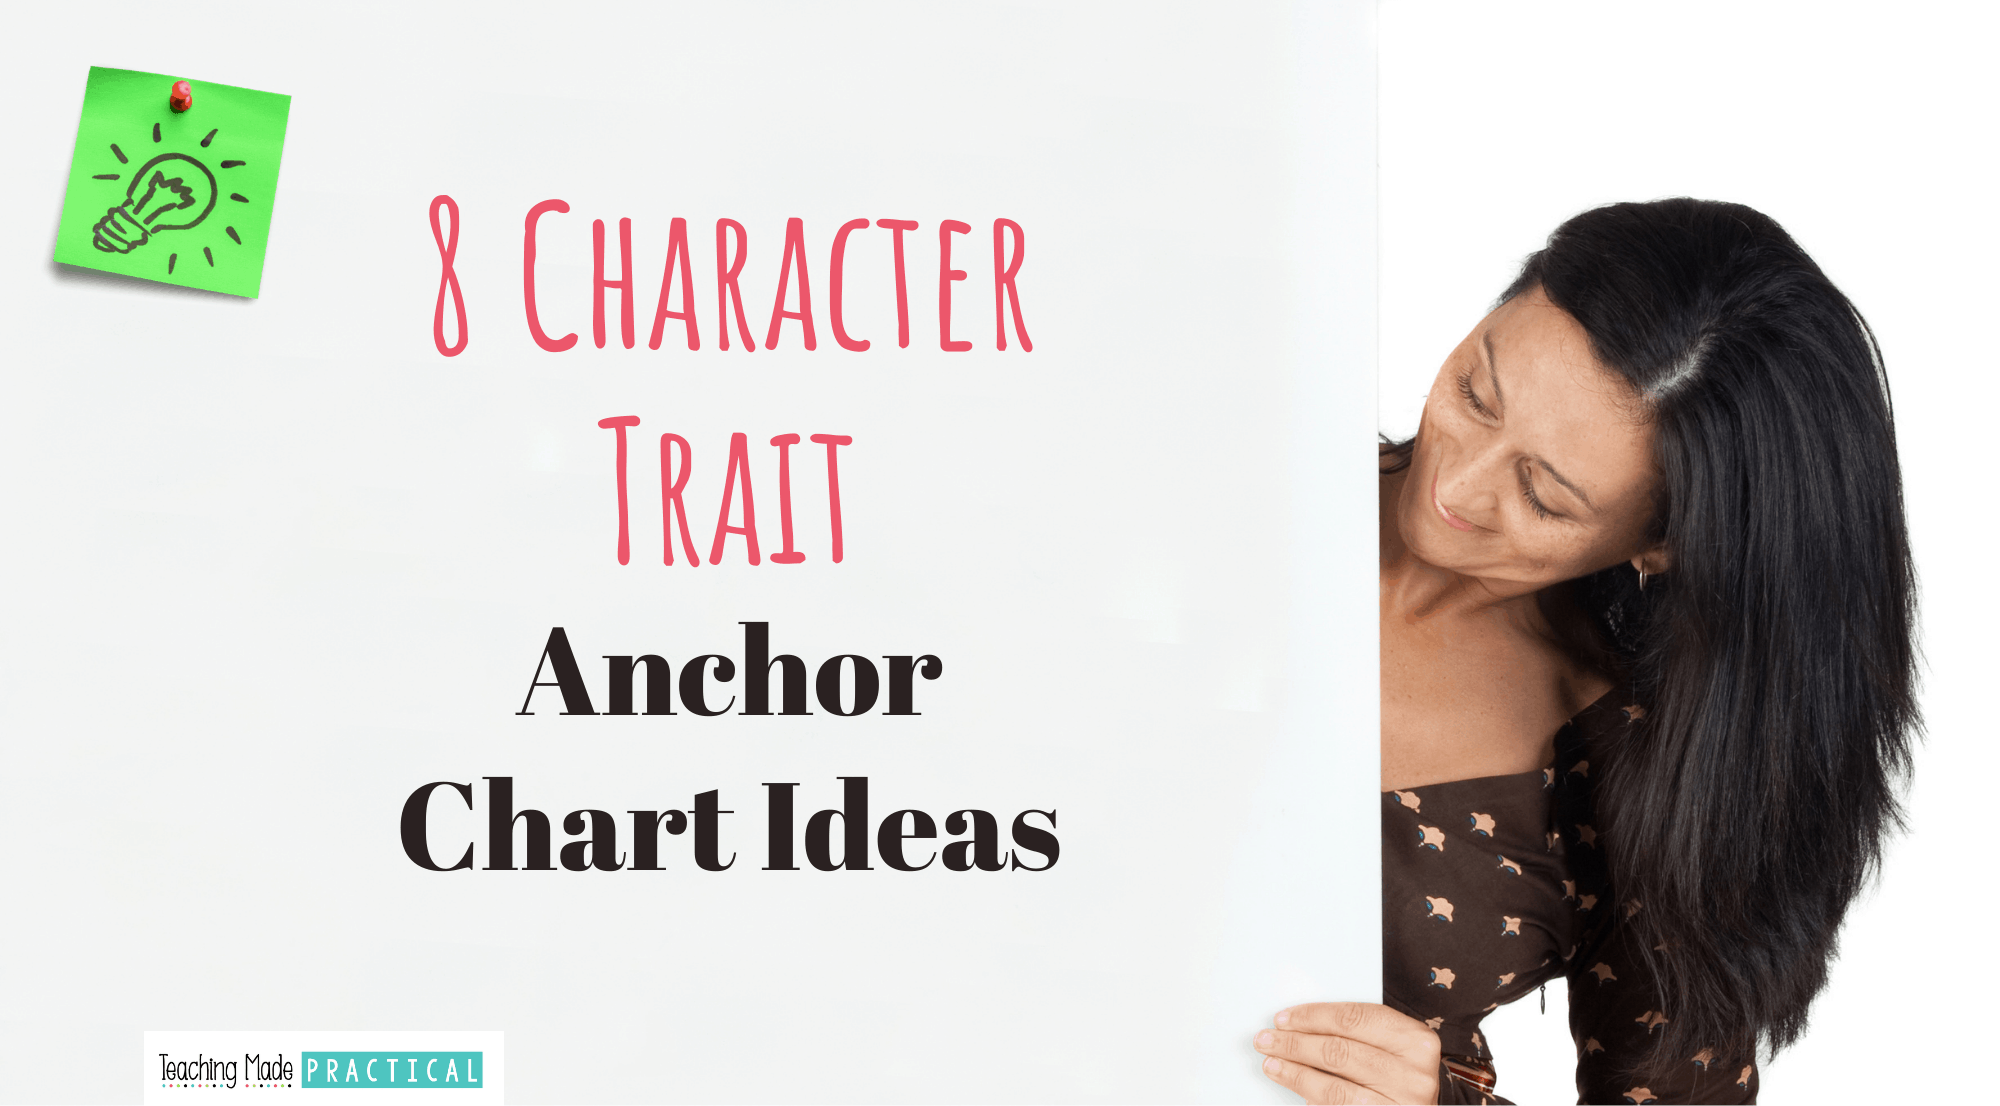 Character trait anchor chart ideas to make lesson planning for 3rd, 4th, and 5th grade easier